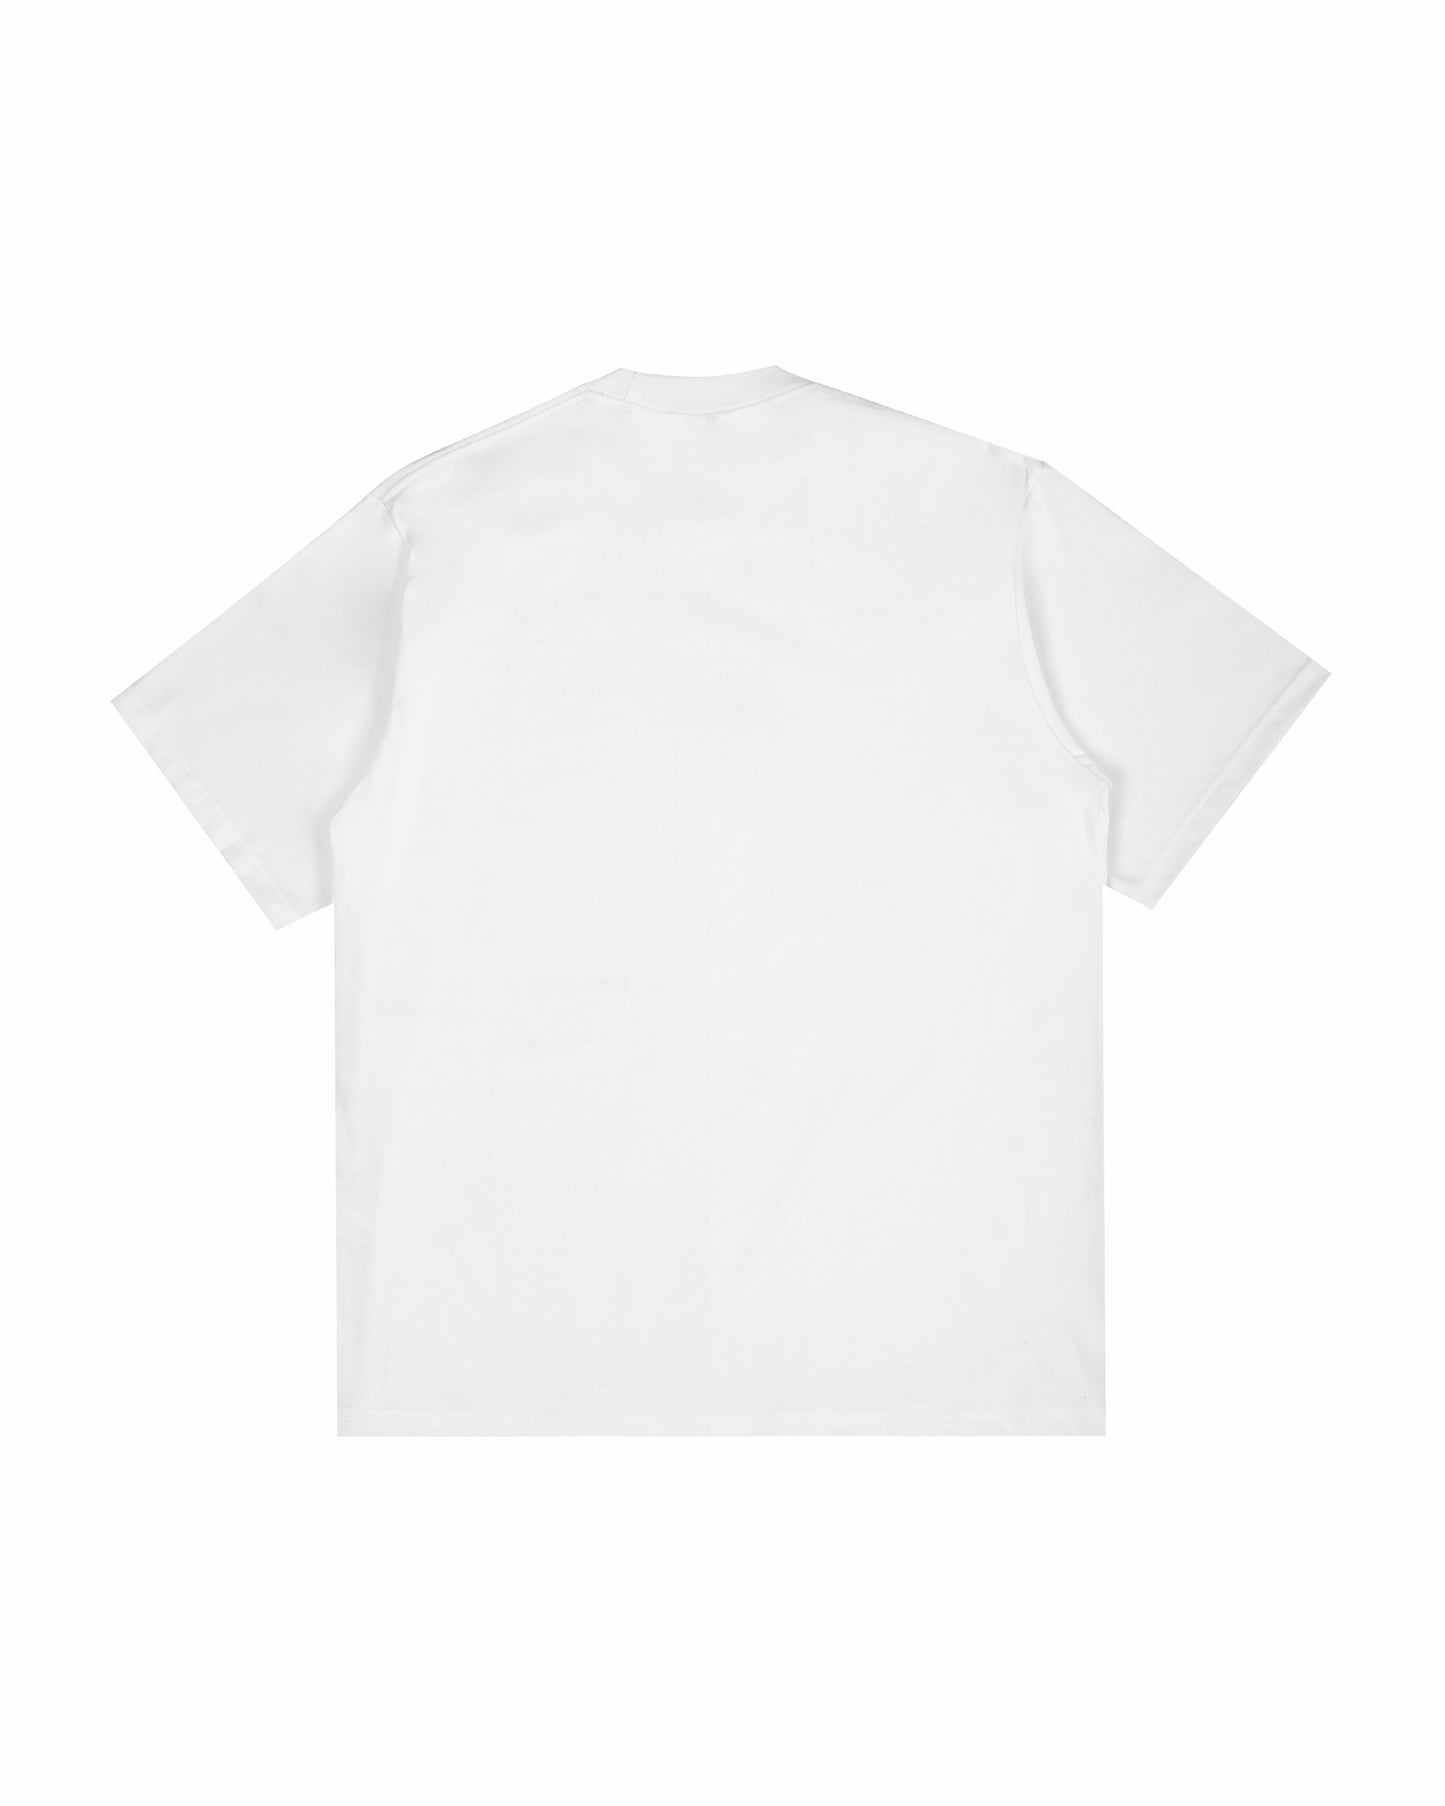 Tria White Relaxed Fit Tees